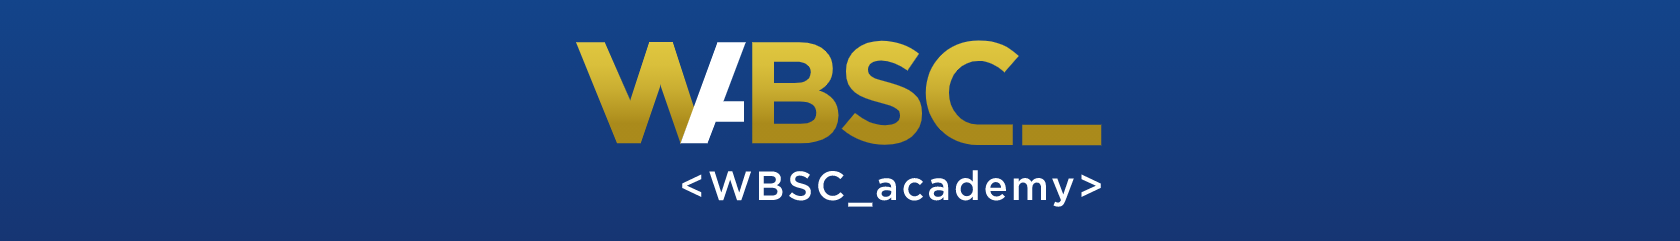 The WBSC Academy was formally launched earlier this month ©WBSC